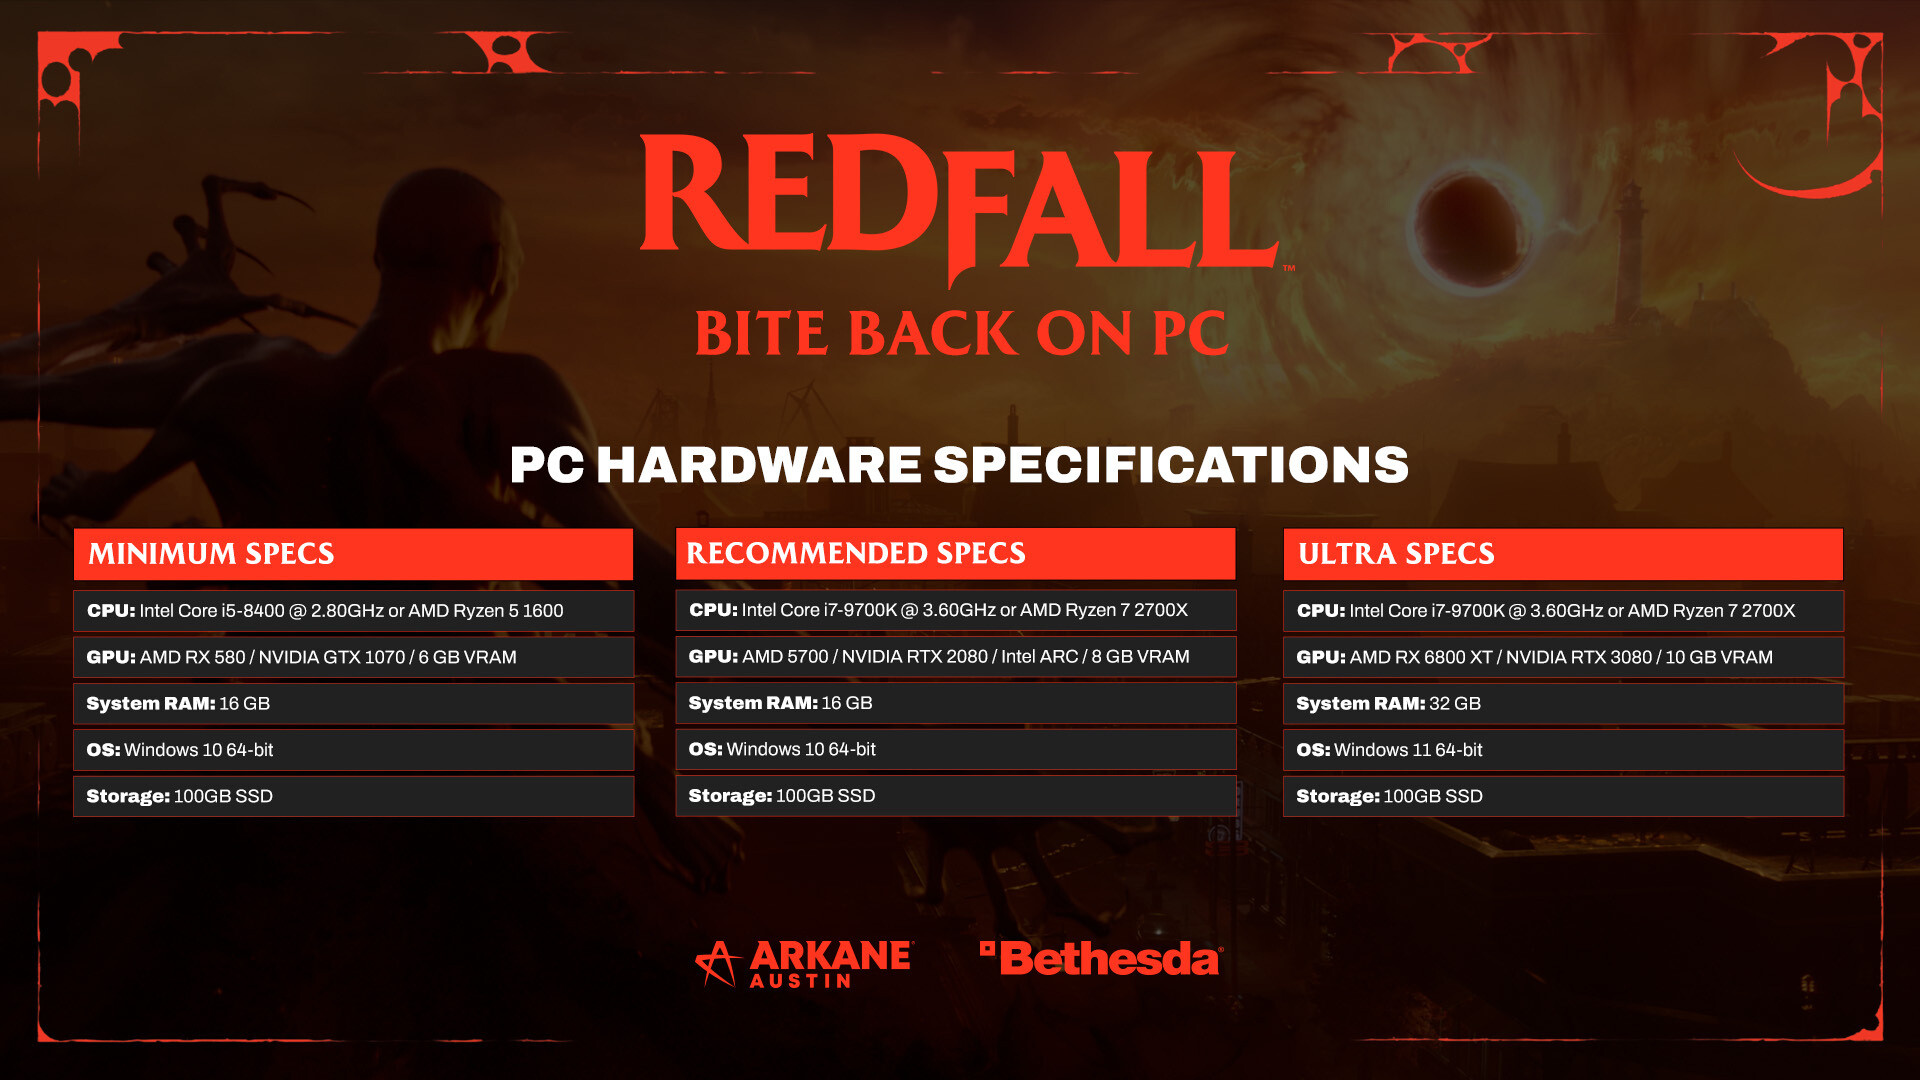 Redfall Revealed, Coming Exclusively to Xbox Series X